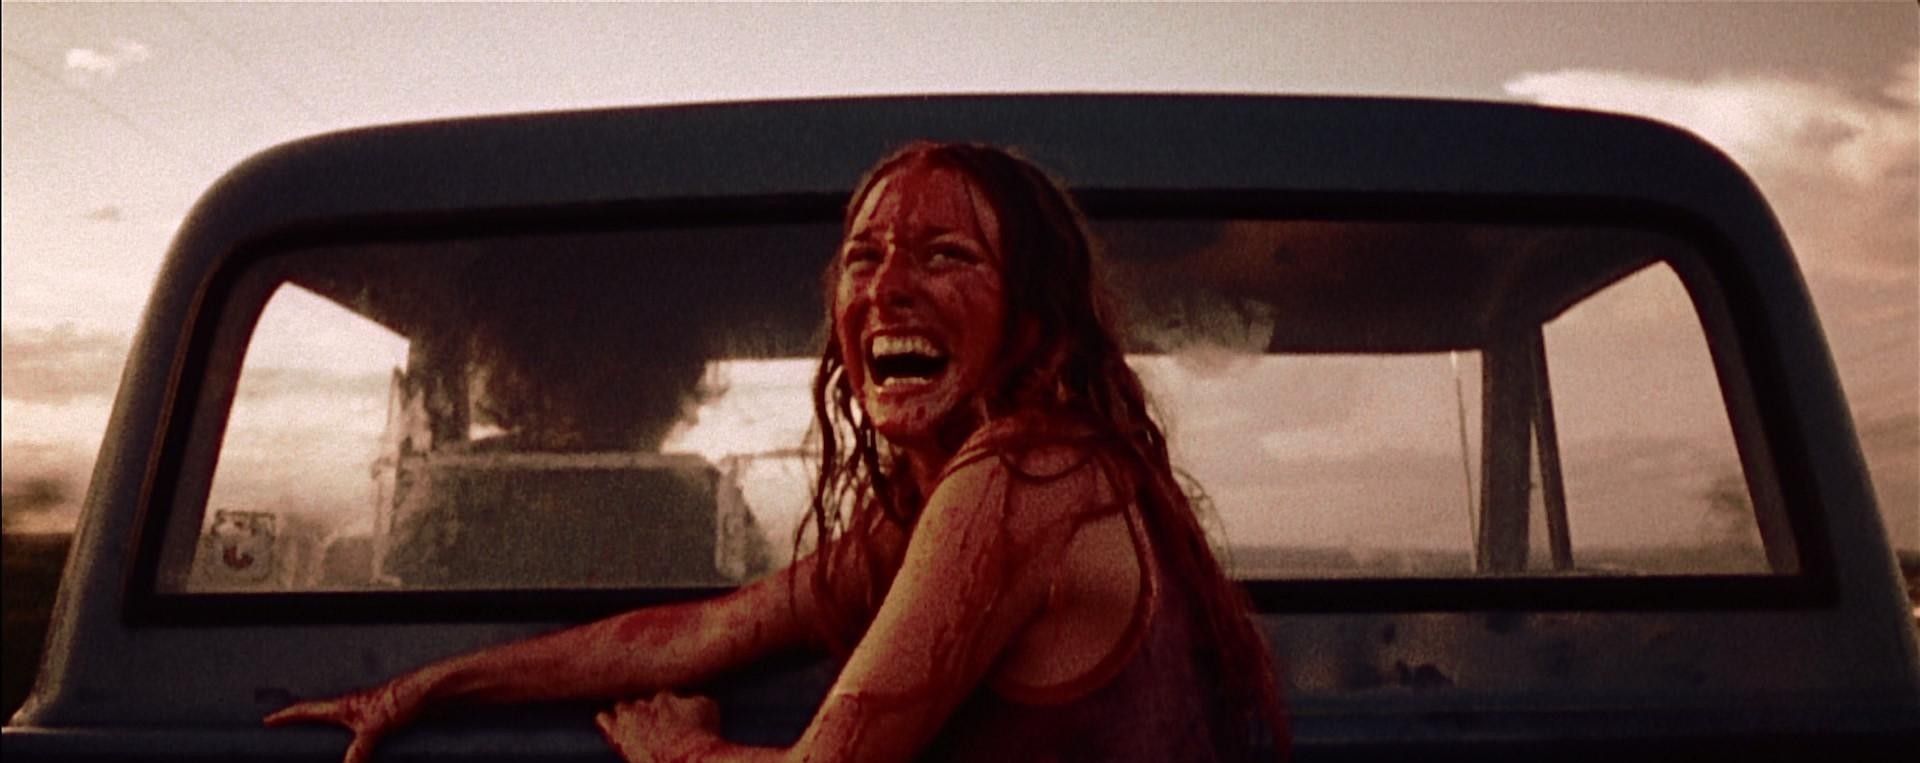 10 Best Slasher Movies Ever Made from Psycho to The Texas Chainsaw